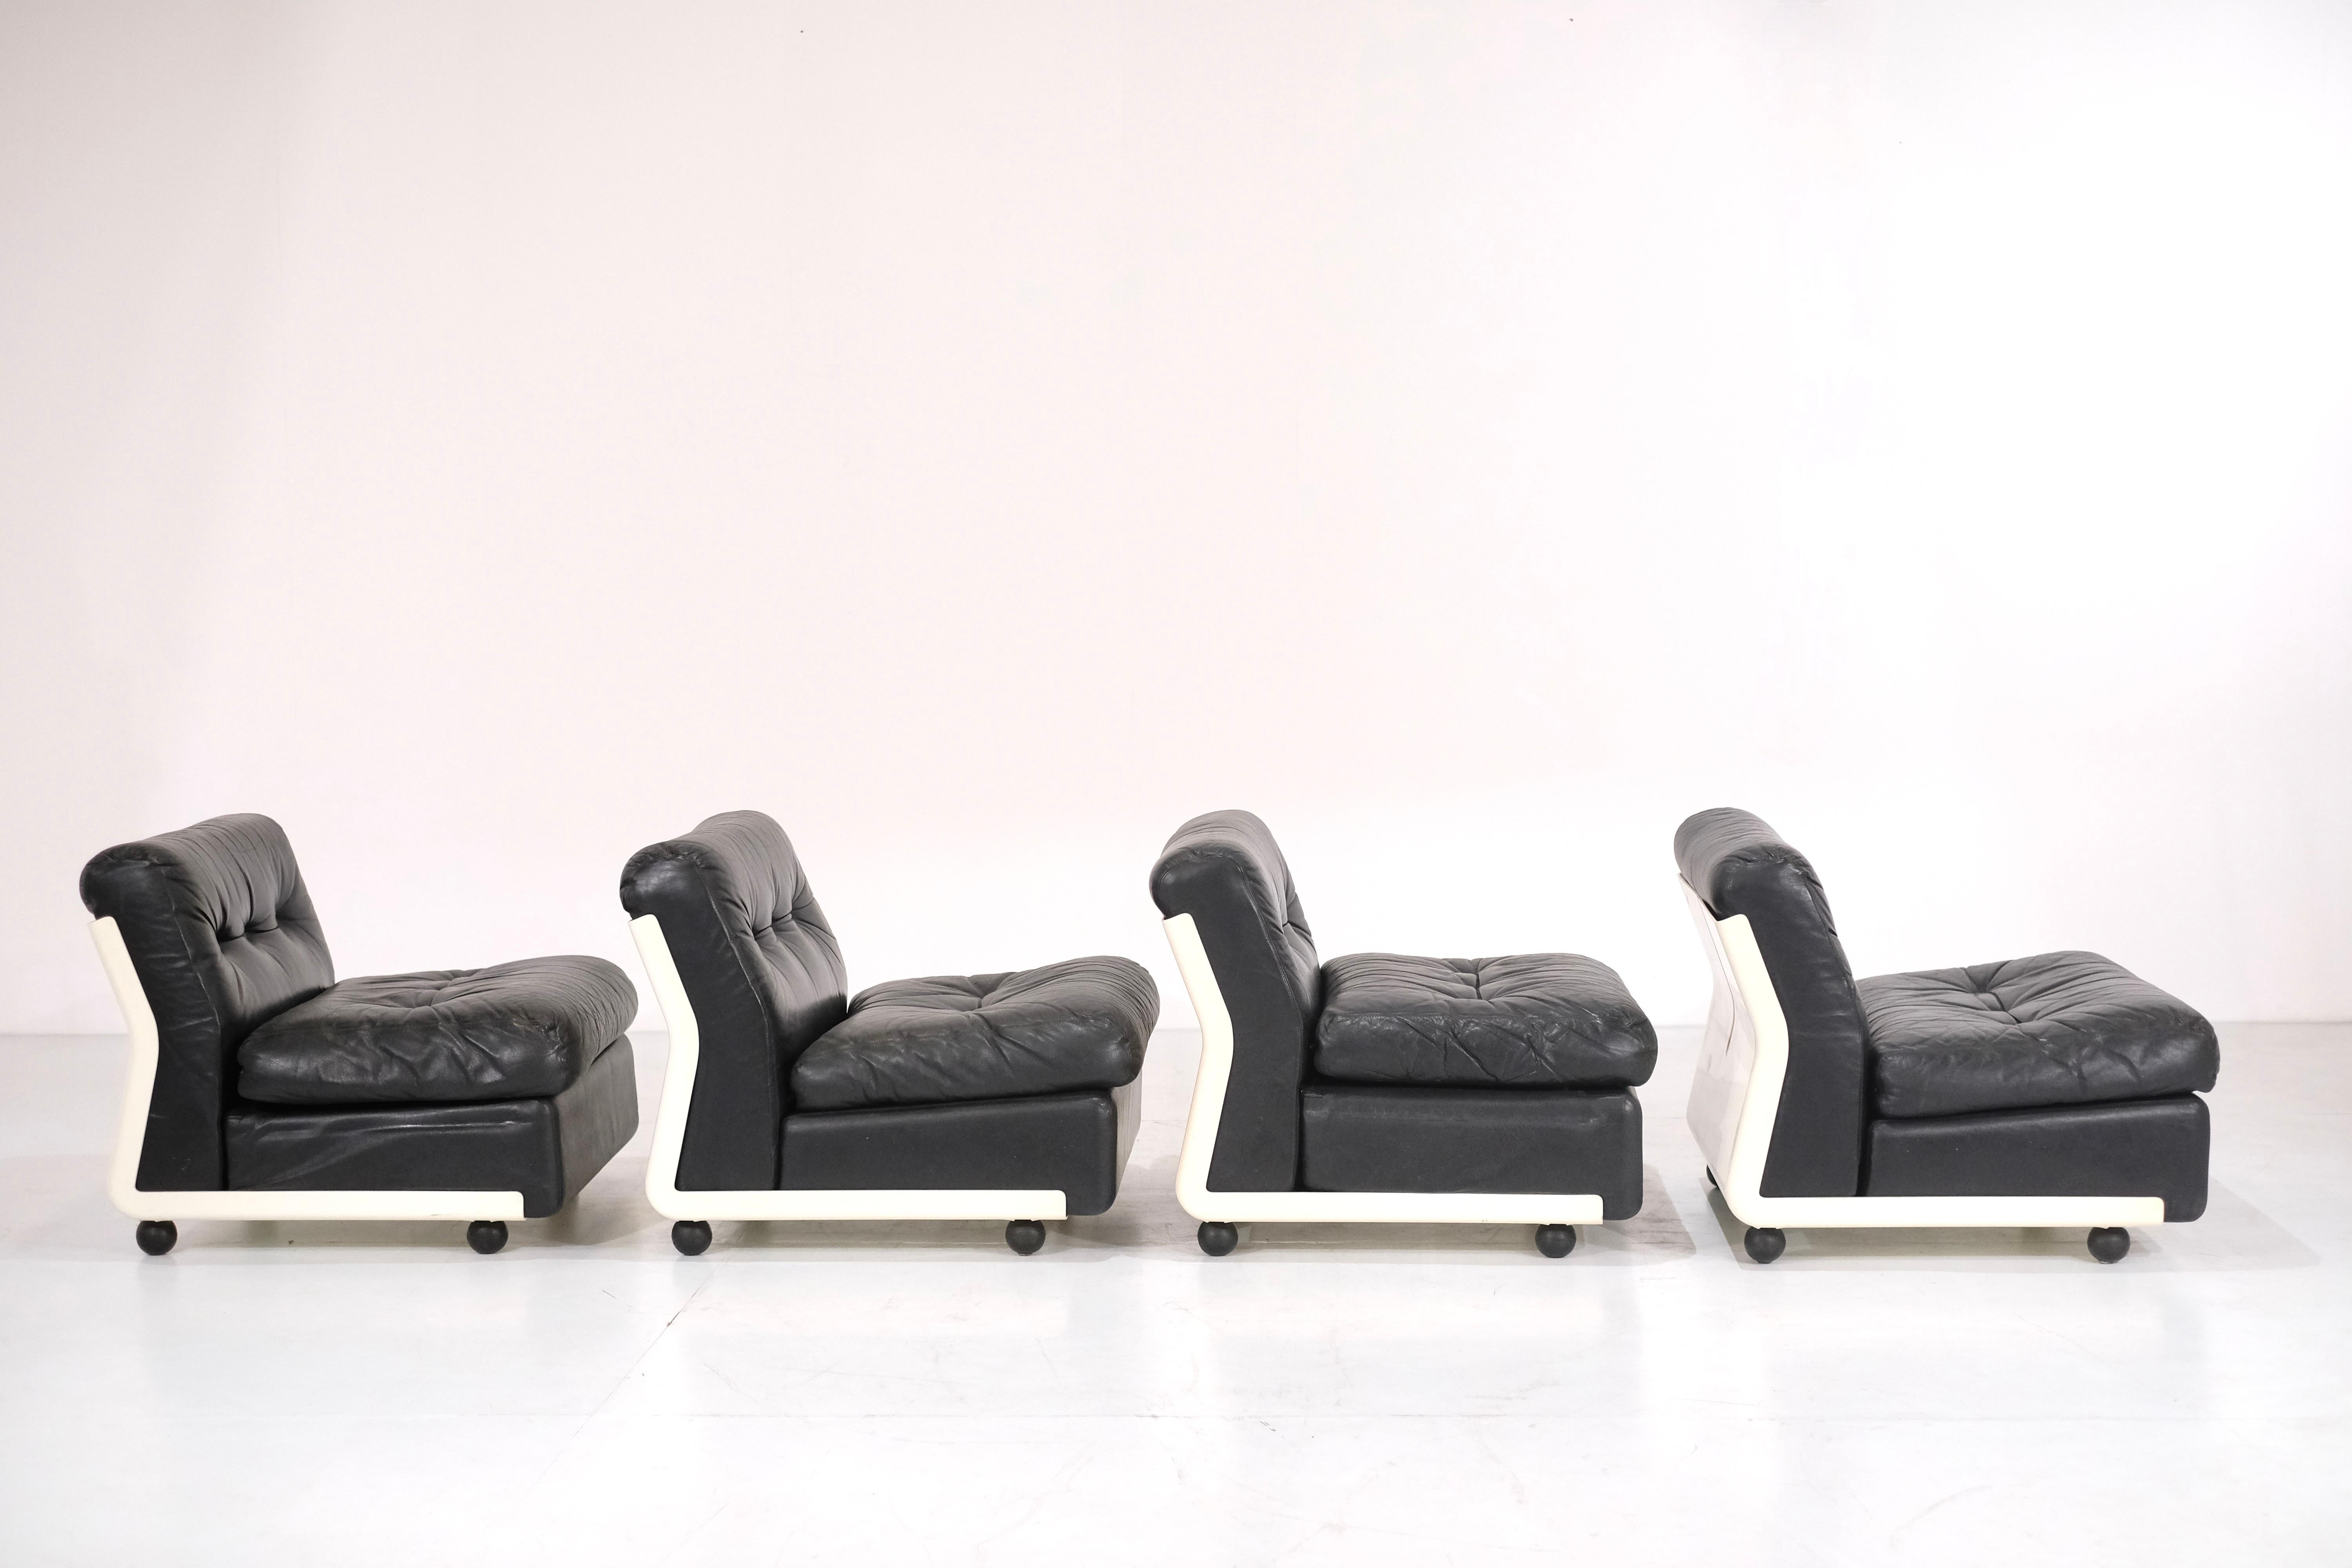 Amazing set of 4 Amanta armchairs in black leather  designed by Mario Bellini for C&B Italia in 1966.

The leather is in really good shape with an amazing patina. They are in really good shape with some signs of use due to the lifetime of the